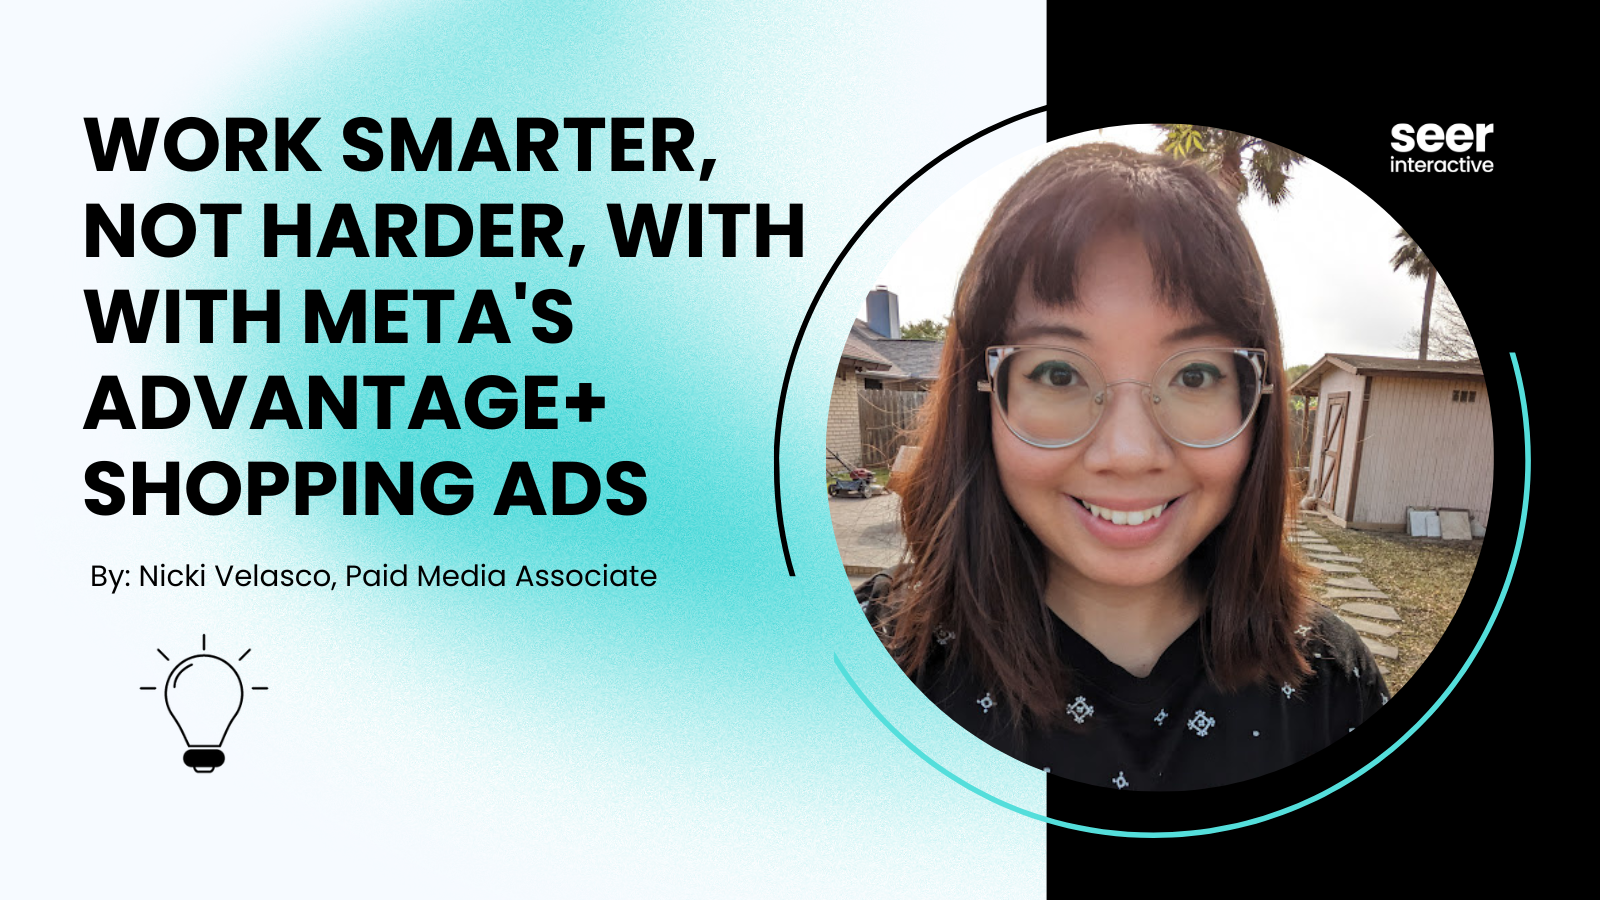 Work Smarter, Not Harder, with Meta's Advantage+ Shopping Ads